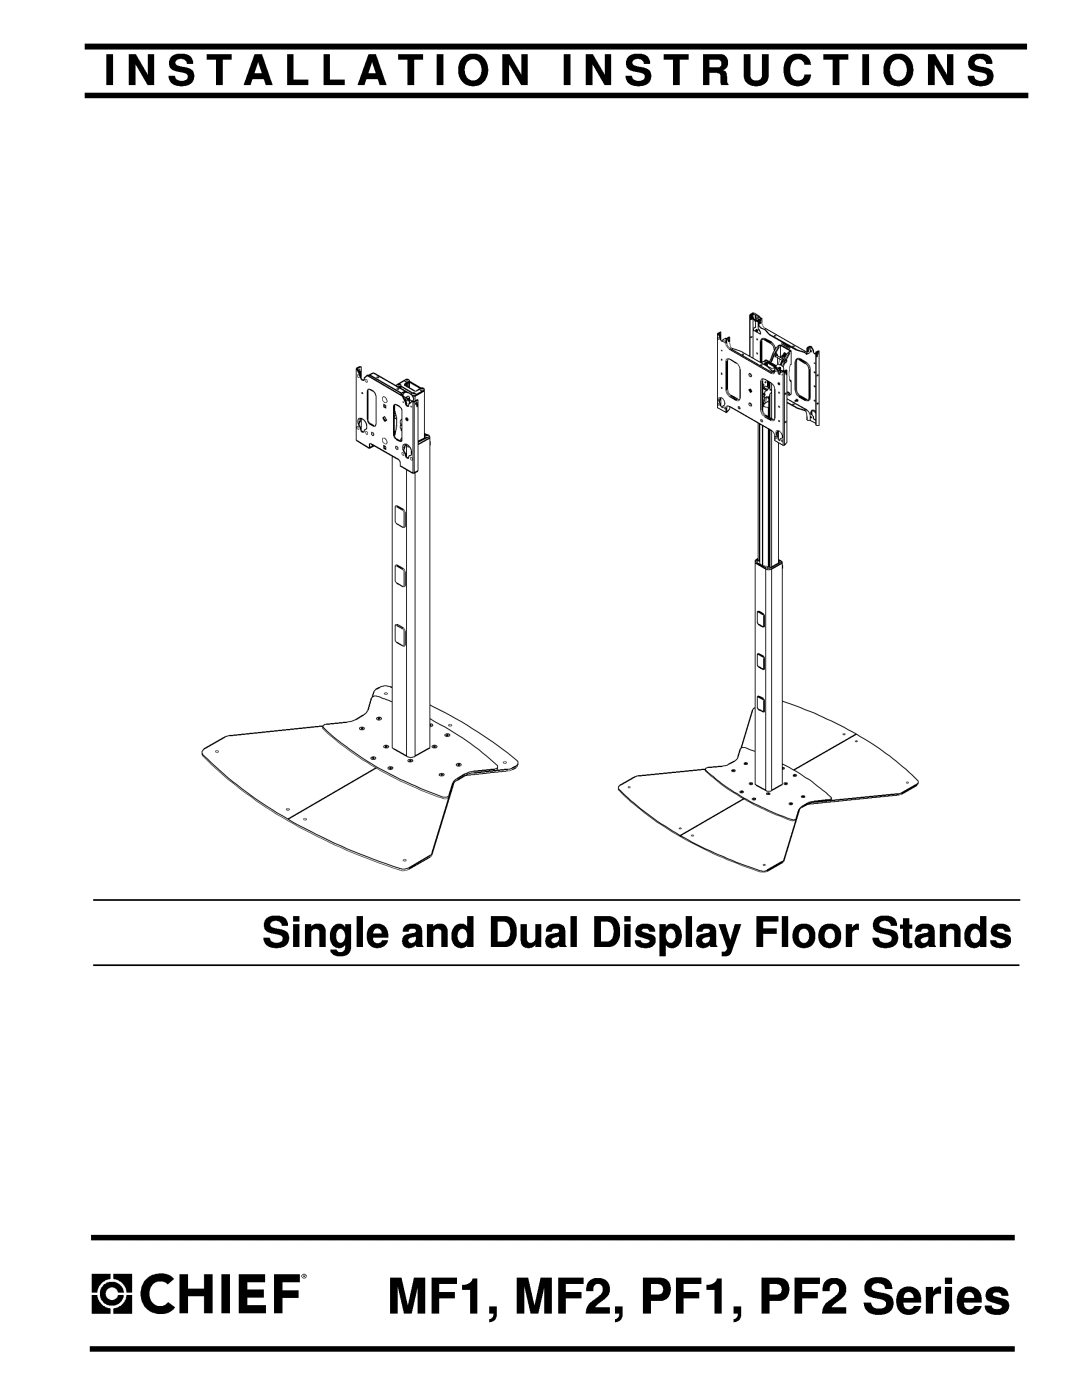 Chief Manufacturing PF1 Series installation instructions MF1, MF2, PF1, PF2 Series, Single and Dual Display Floor Stands 